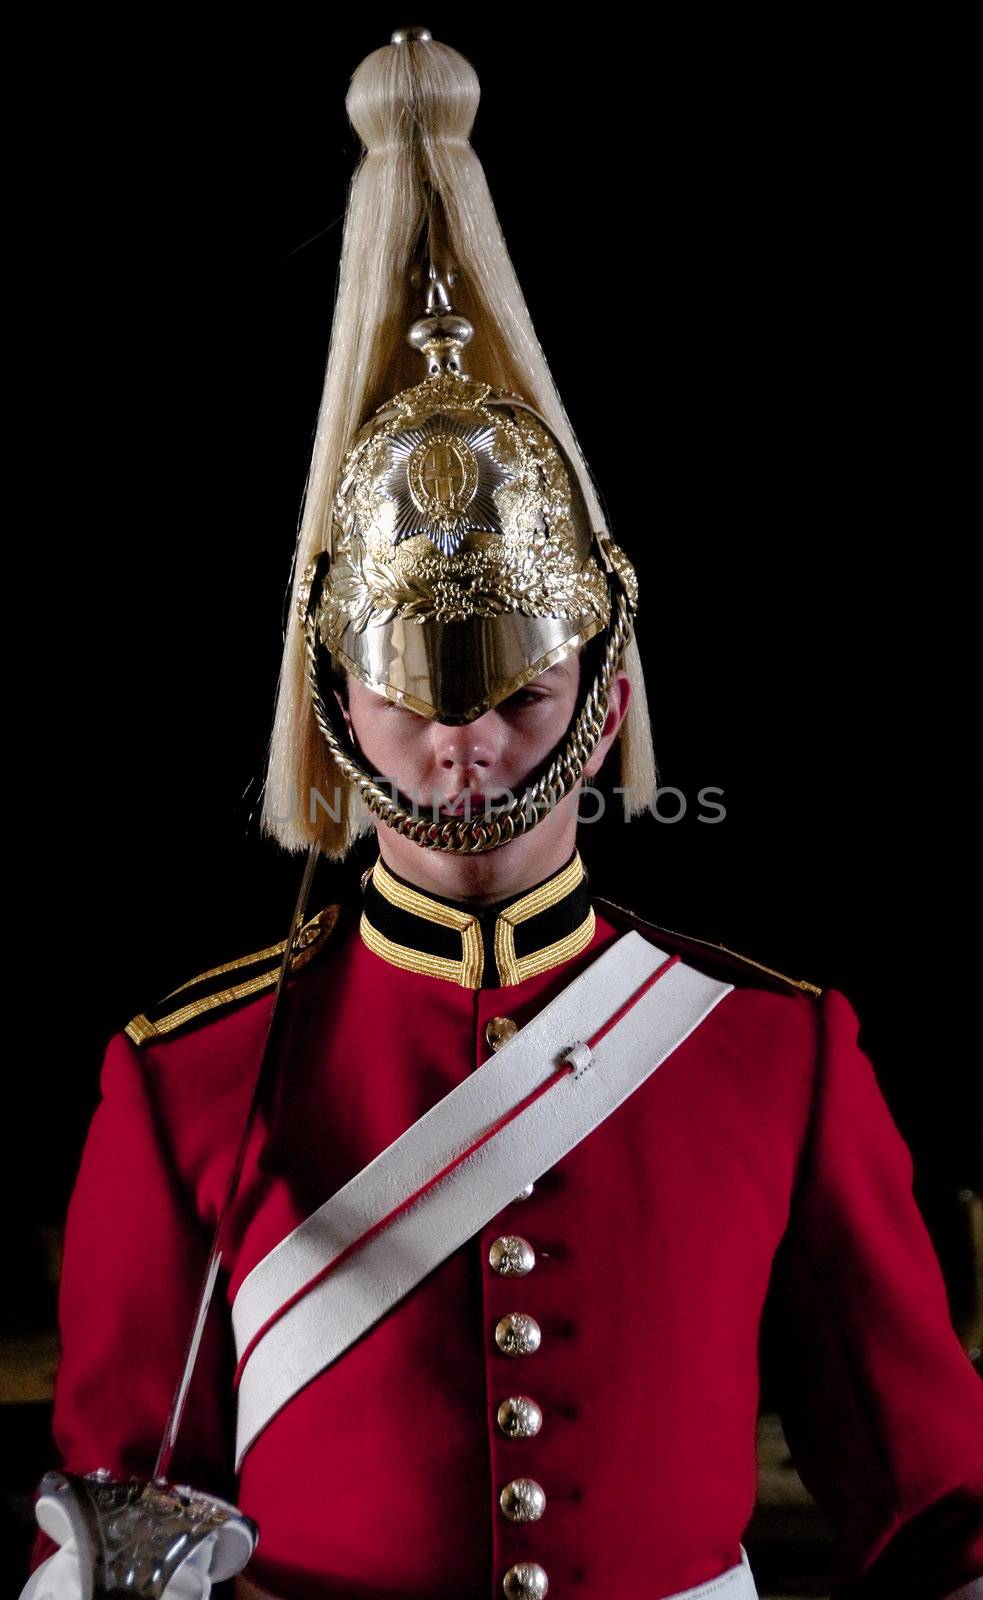 London, UK - April 20, 2011: A sentry of the Queen's Guard standing at Horse Guards Parade